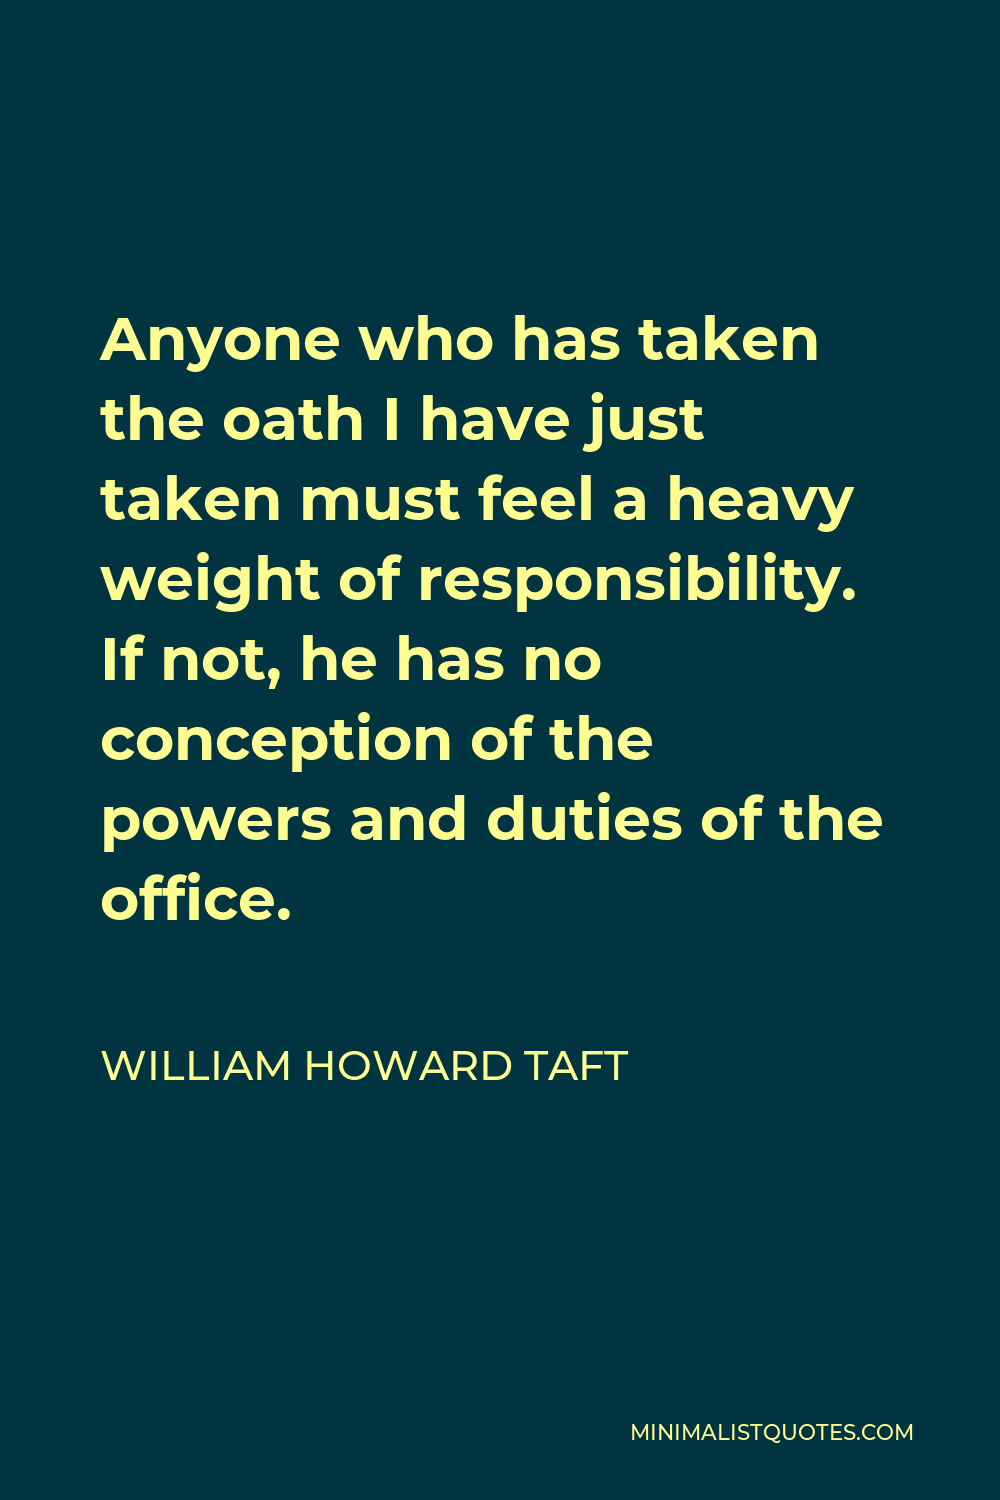 William Howard Taft Quote - Anyone who has taken the oath I have just taken must feel a heavy weight of responsibility. If not, he has no conception of the powers and duties of the office.